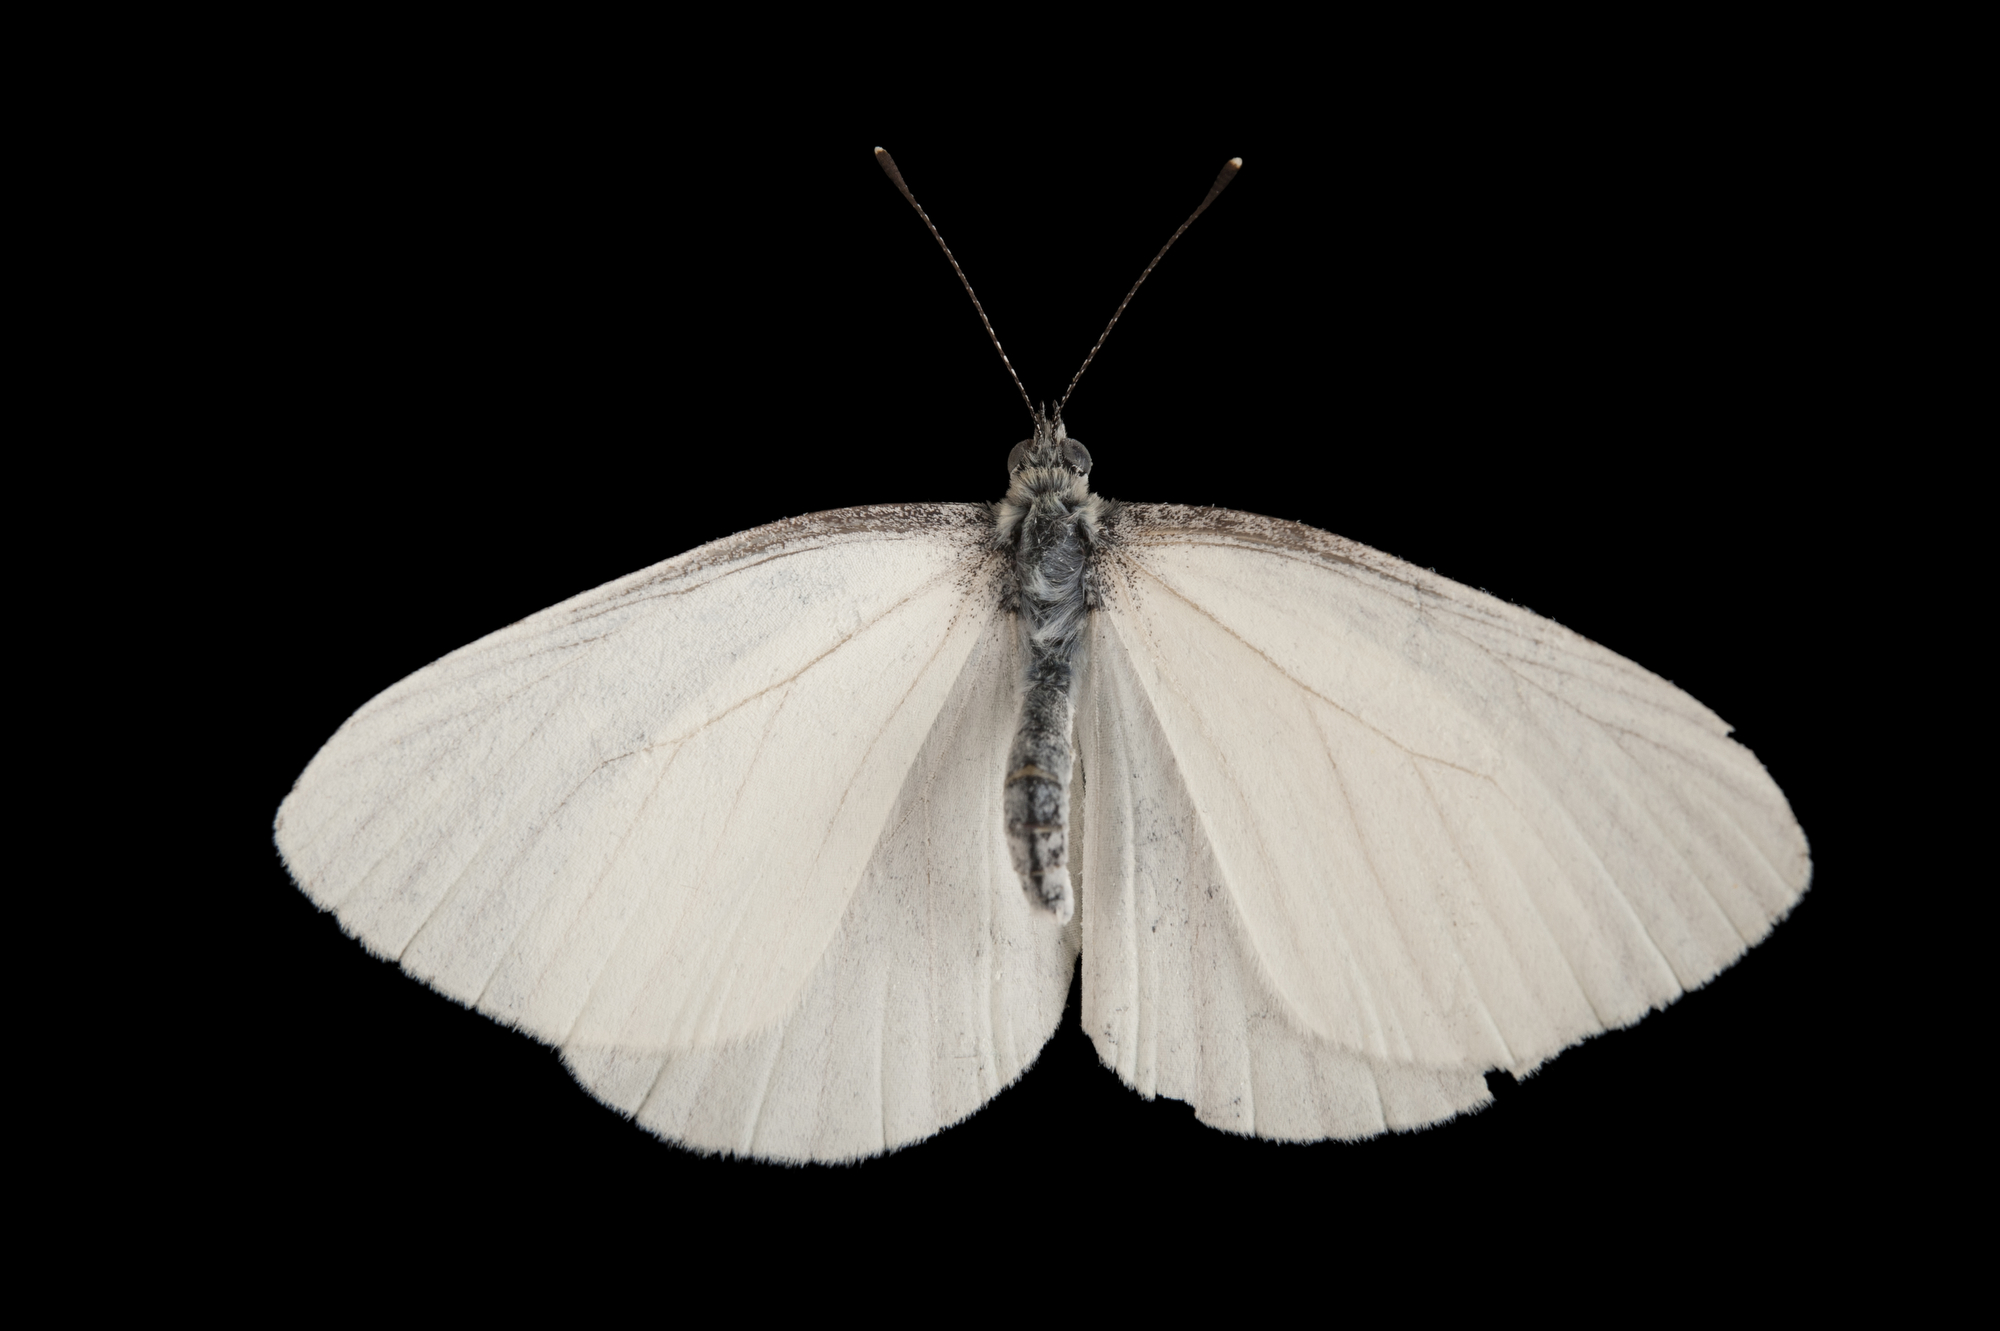 mustard white butterfly images - Joel Sartore